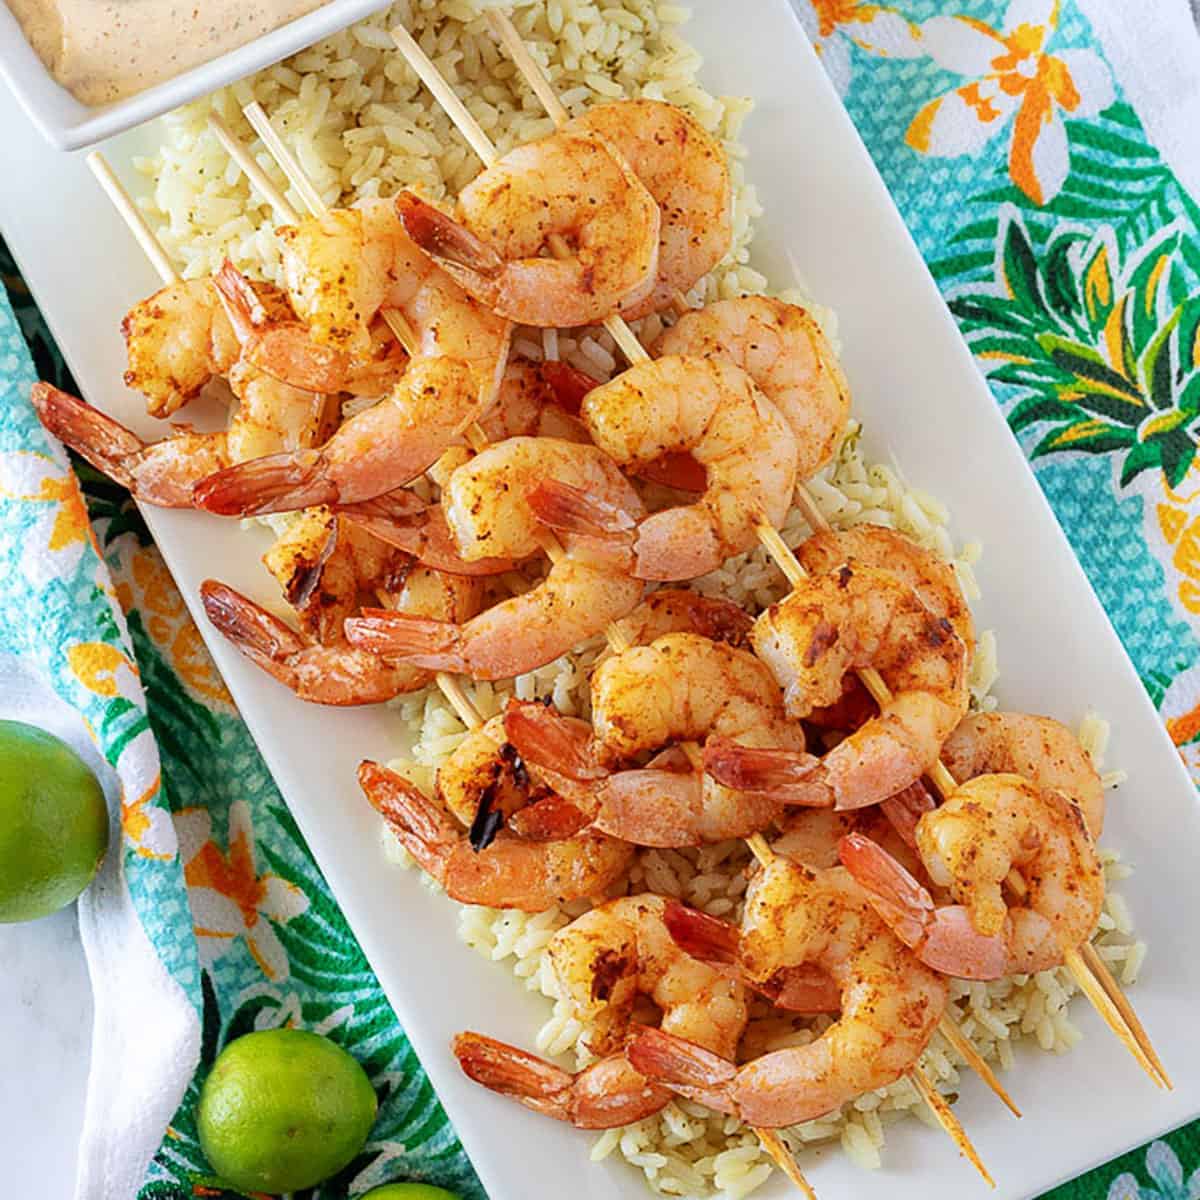 Top down view of grilled shrimp skewers on a bed of rice.